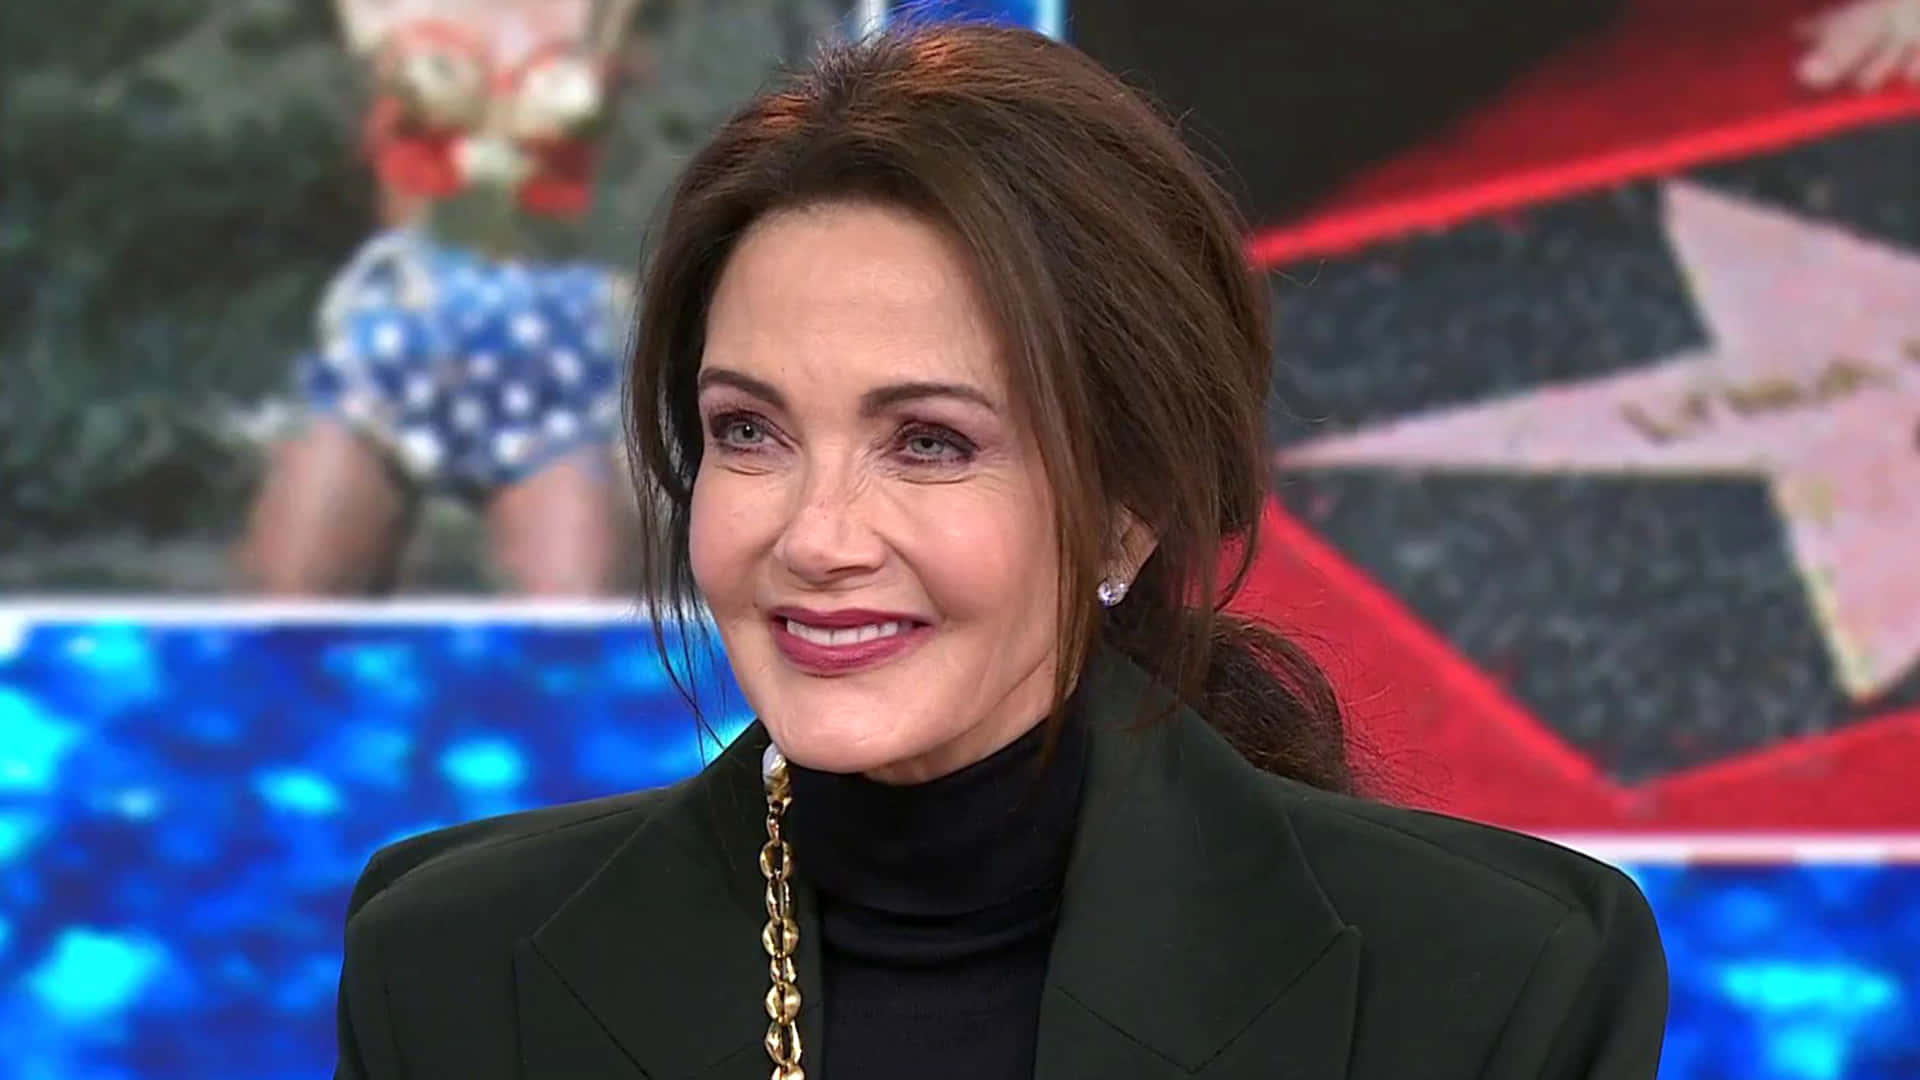 Lynda Carter Smiling During Interview Background